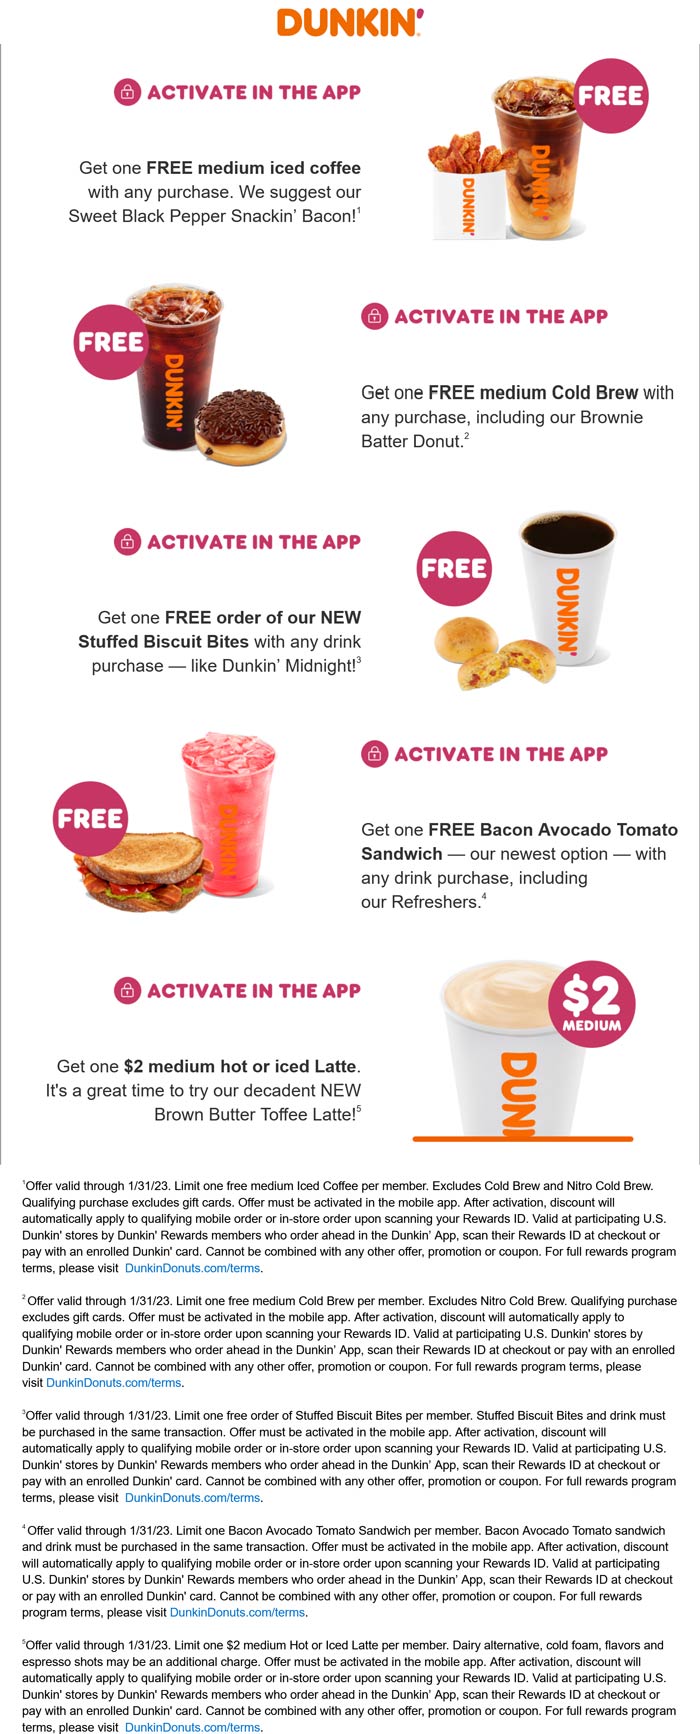 Dunkin Donuts coupons & promo code for [February 2023]